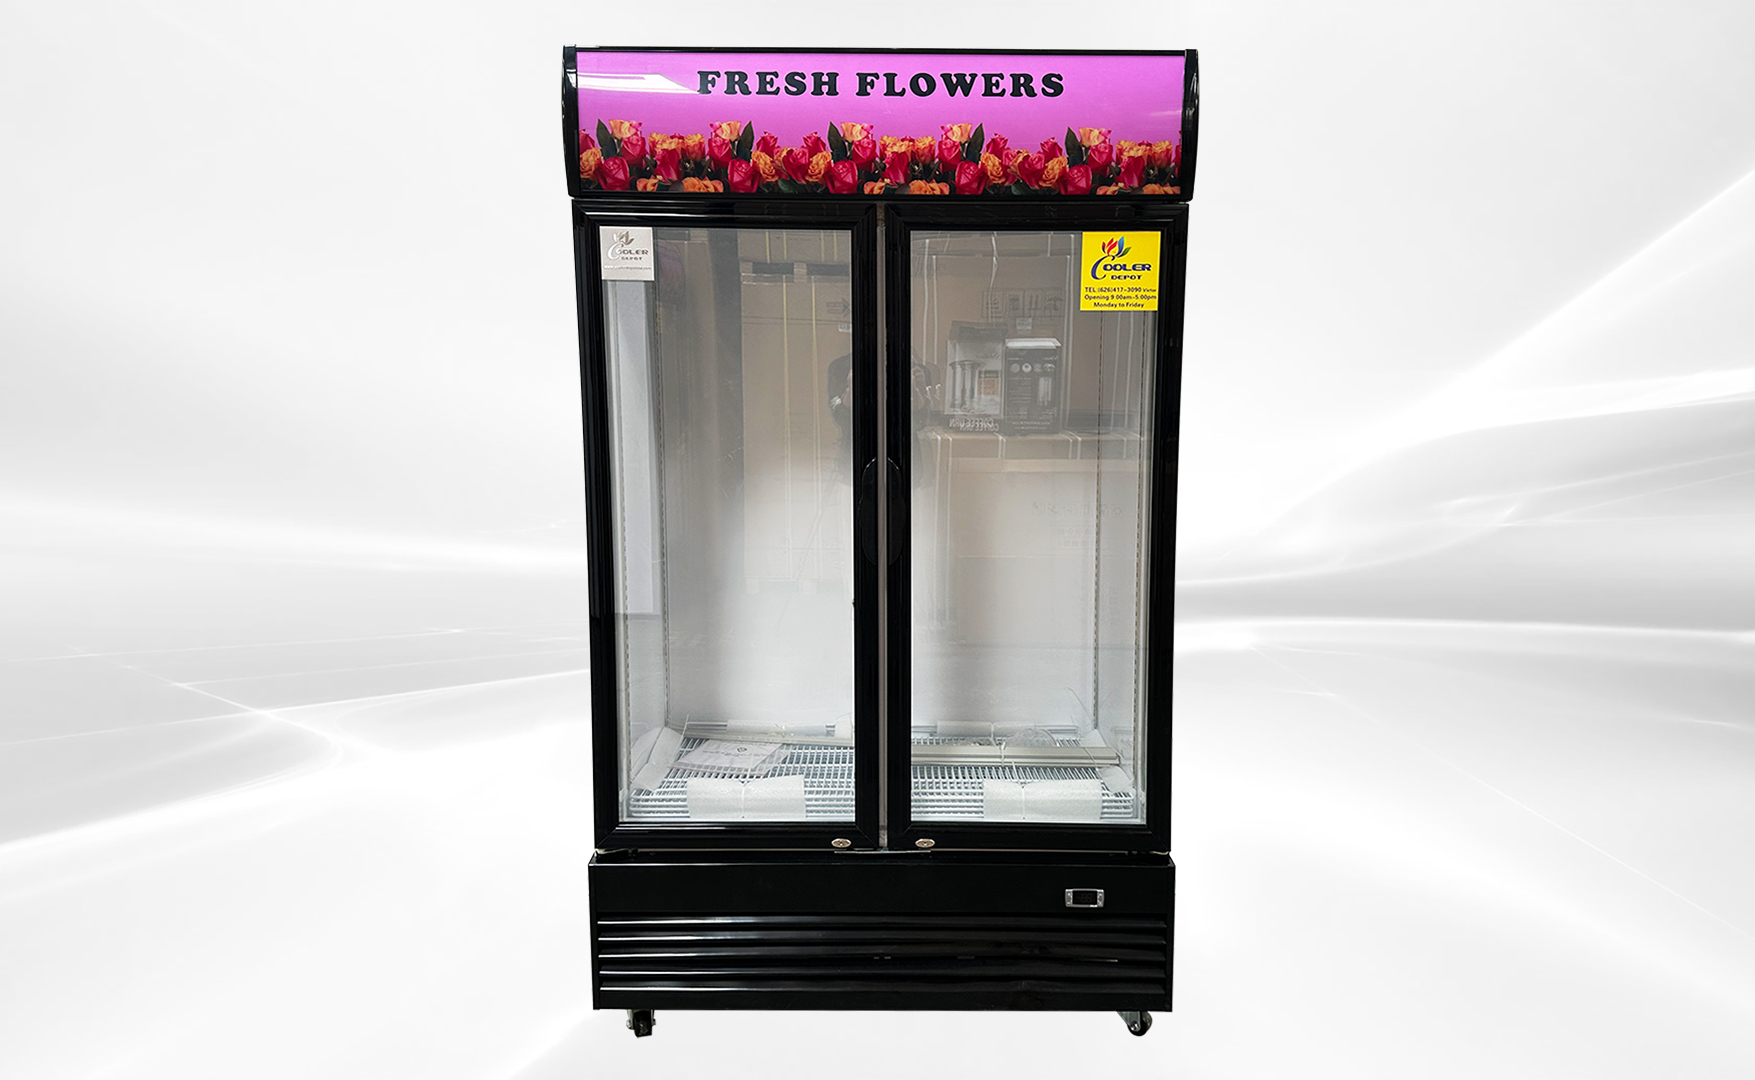 NSF 48 ins Commercial Refrigerator Display Flowers FLOWERS1000BF